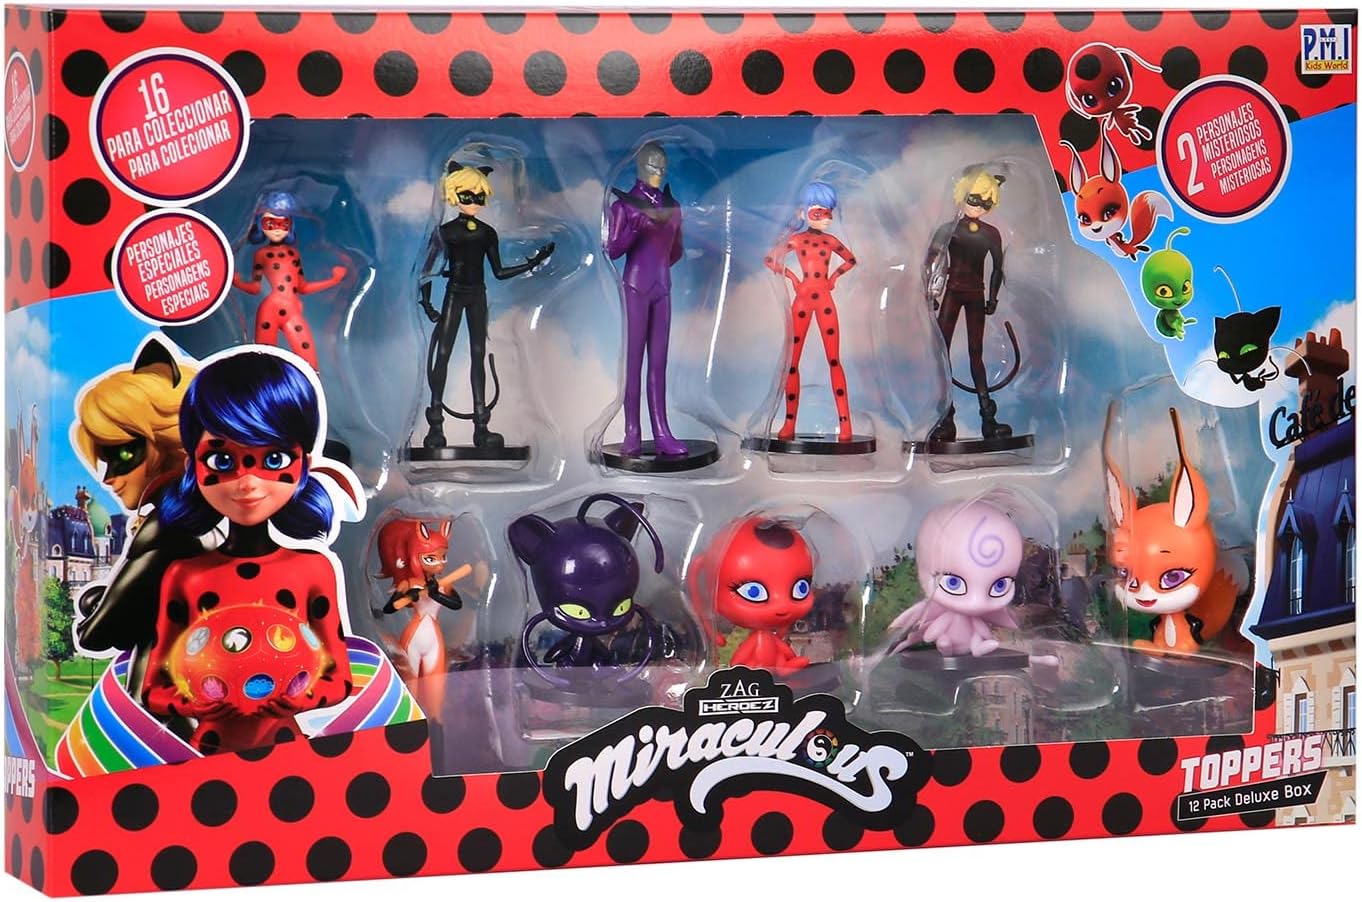 Miraculous Ladybug - GET 4, Paris Grid with Connect Ladybug and Cat Noir  Tokens, 4 in a Row Game, Strategy Board Games for Kids, 2 Players, Toys for